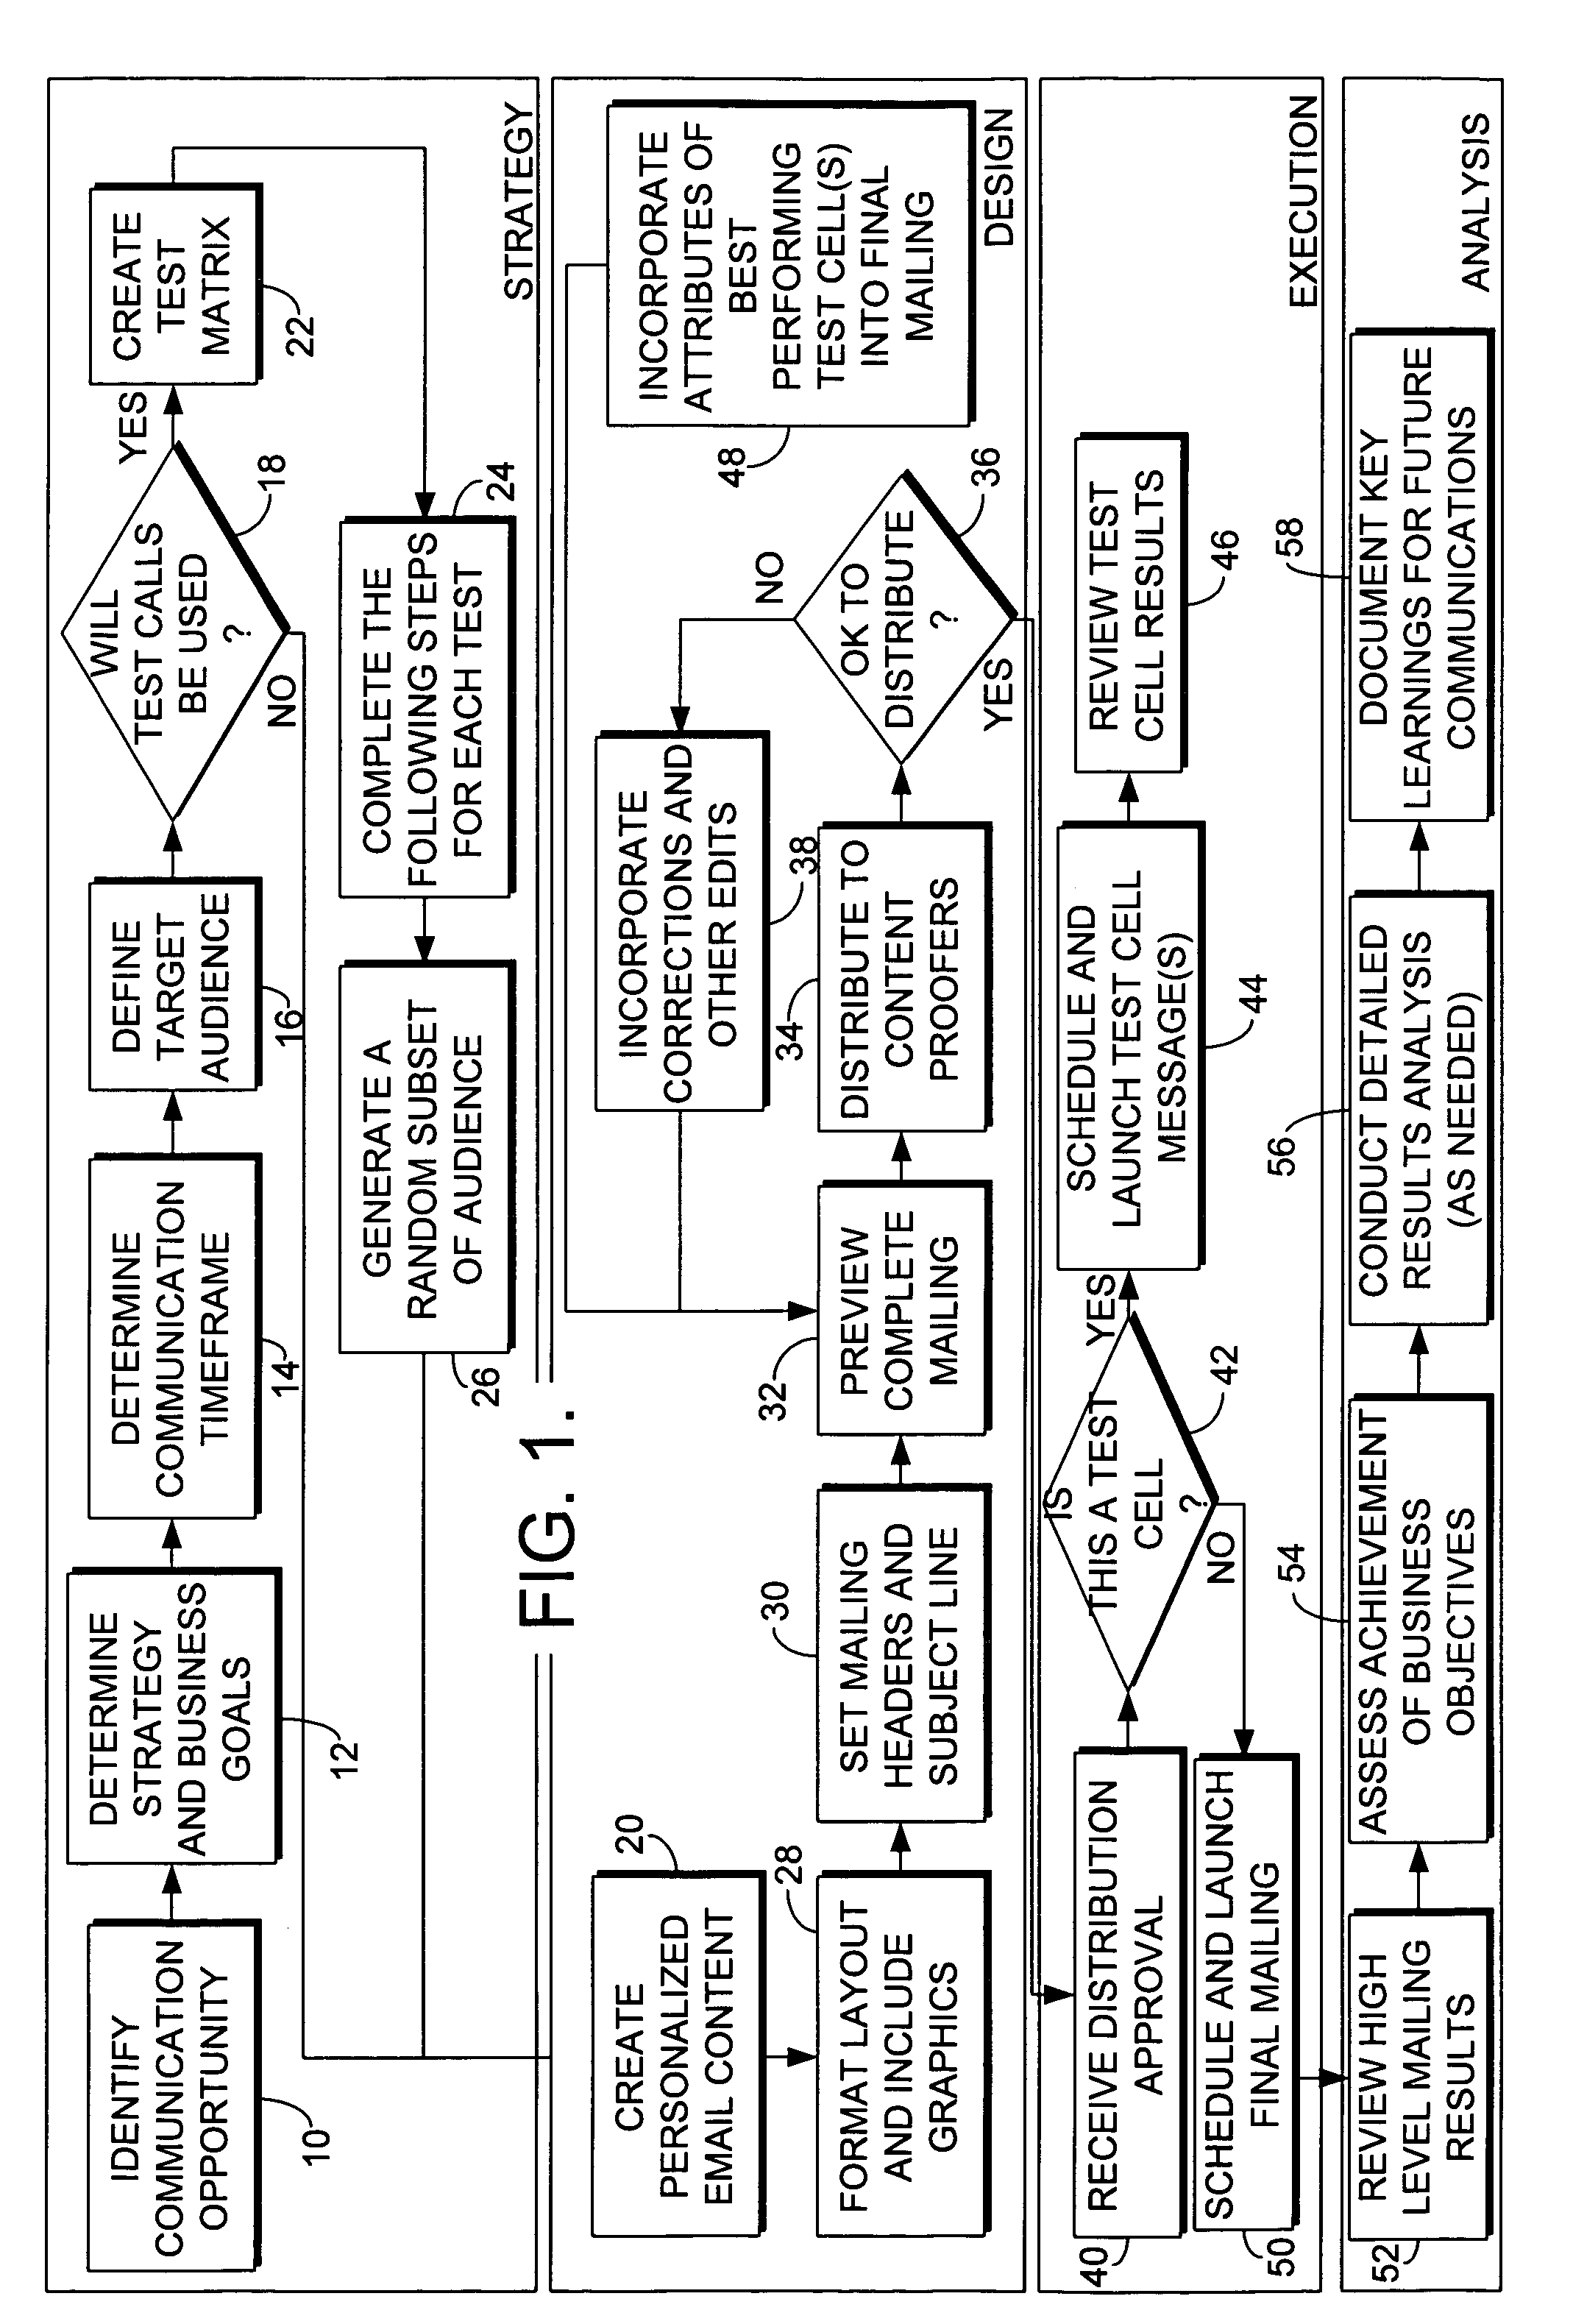 Method and system for sending bulk electronic messages